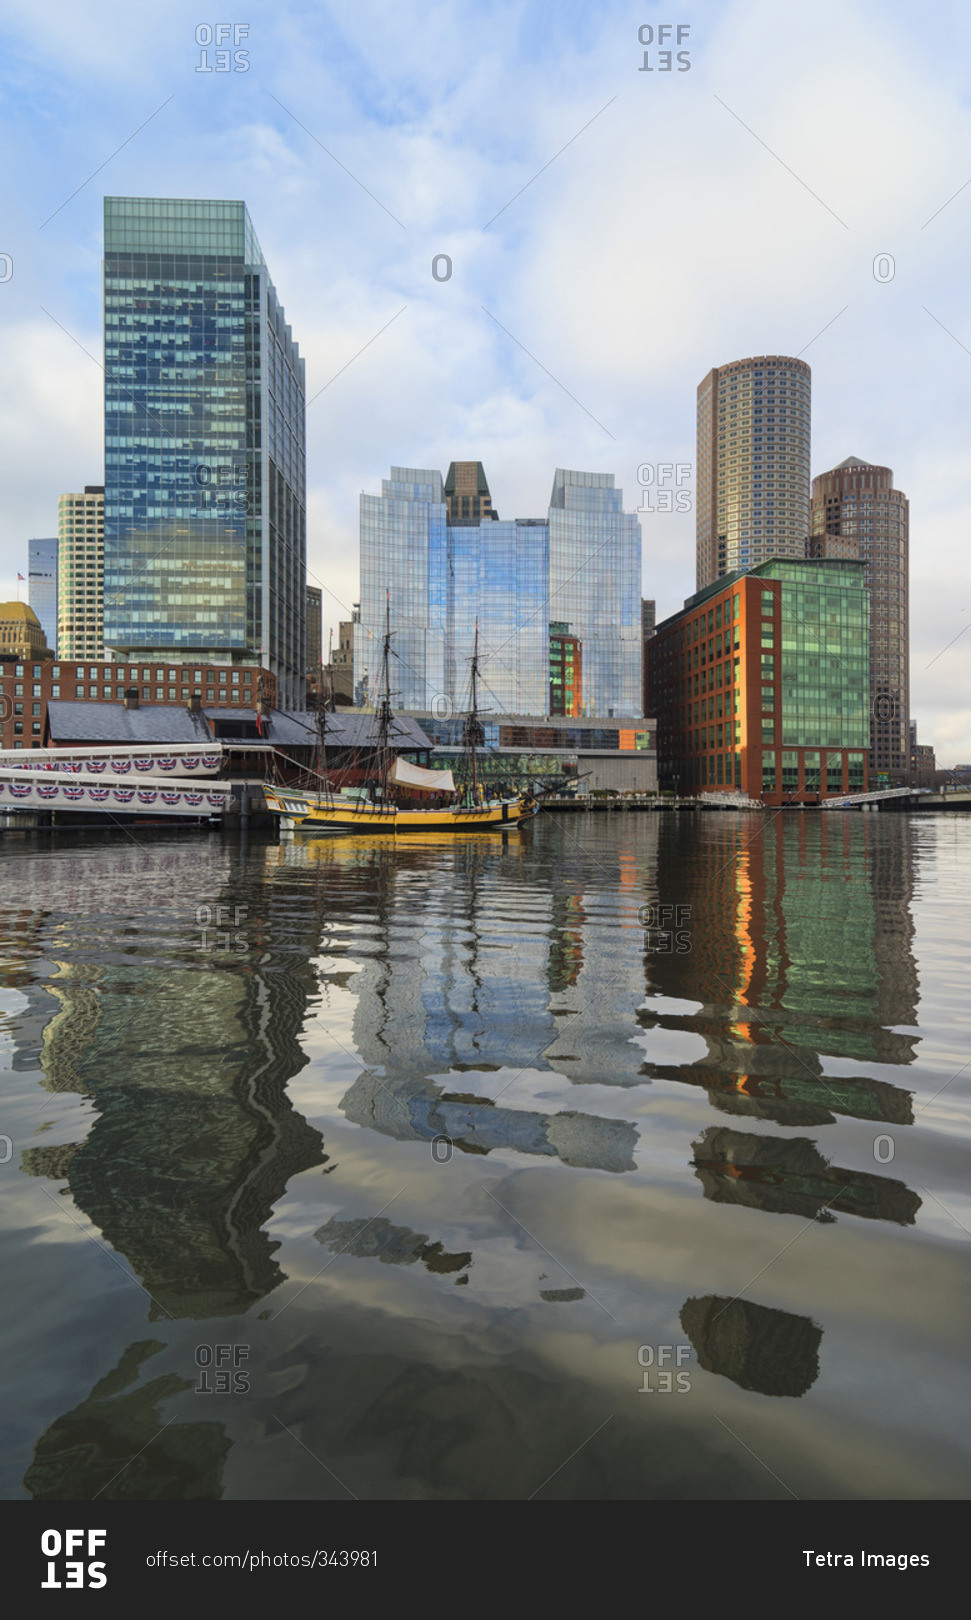 Waterfront of Boston with buildings reflecting in water